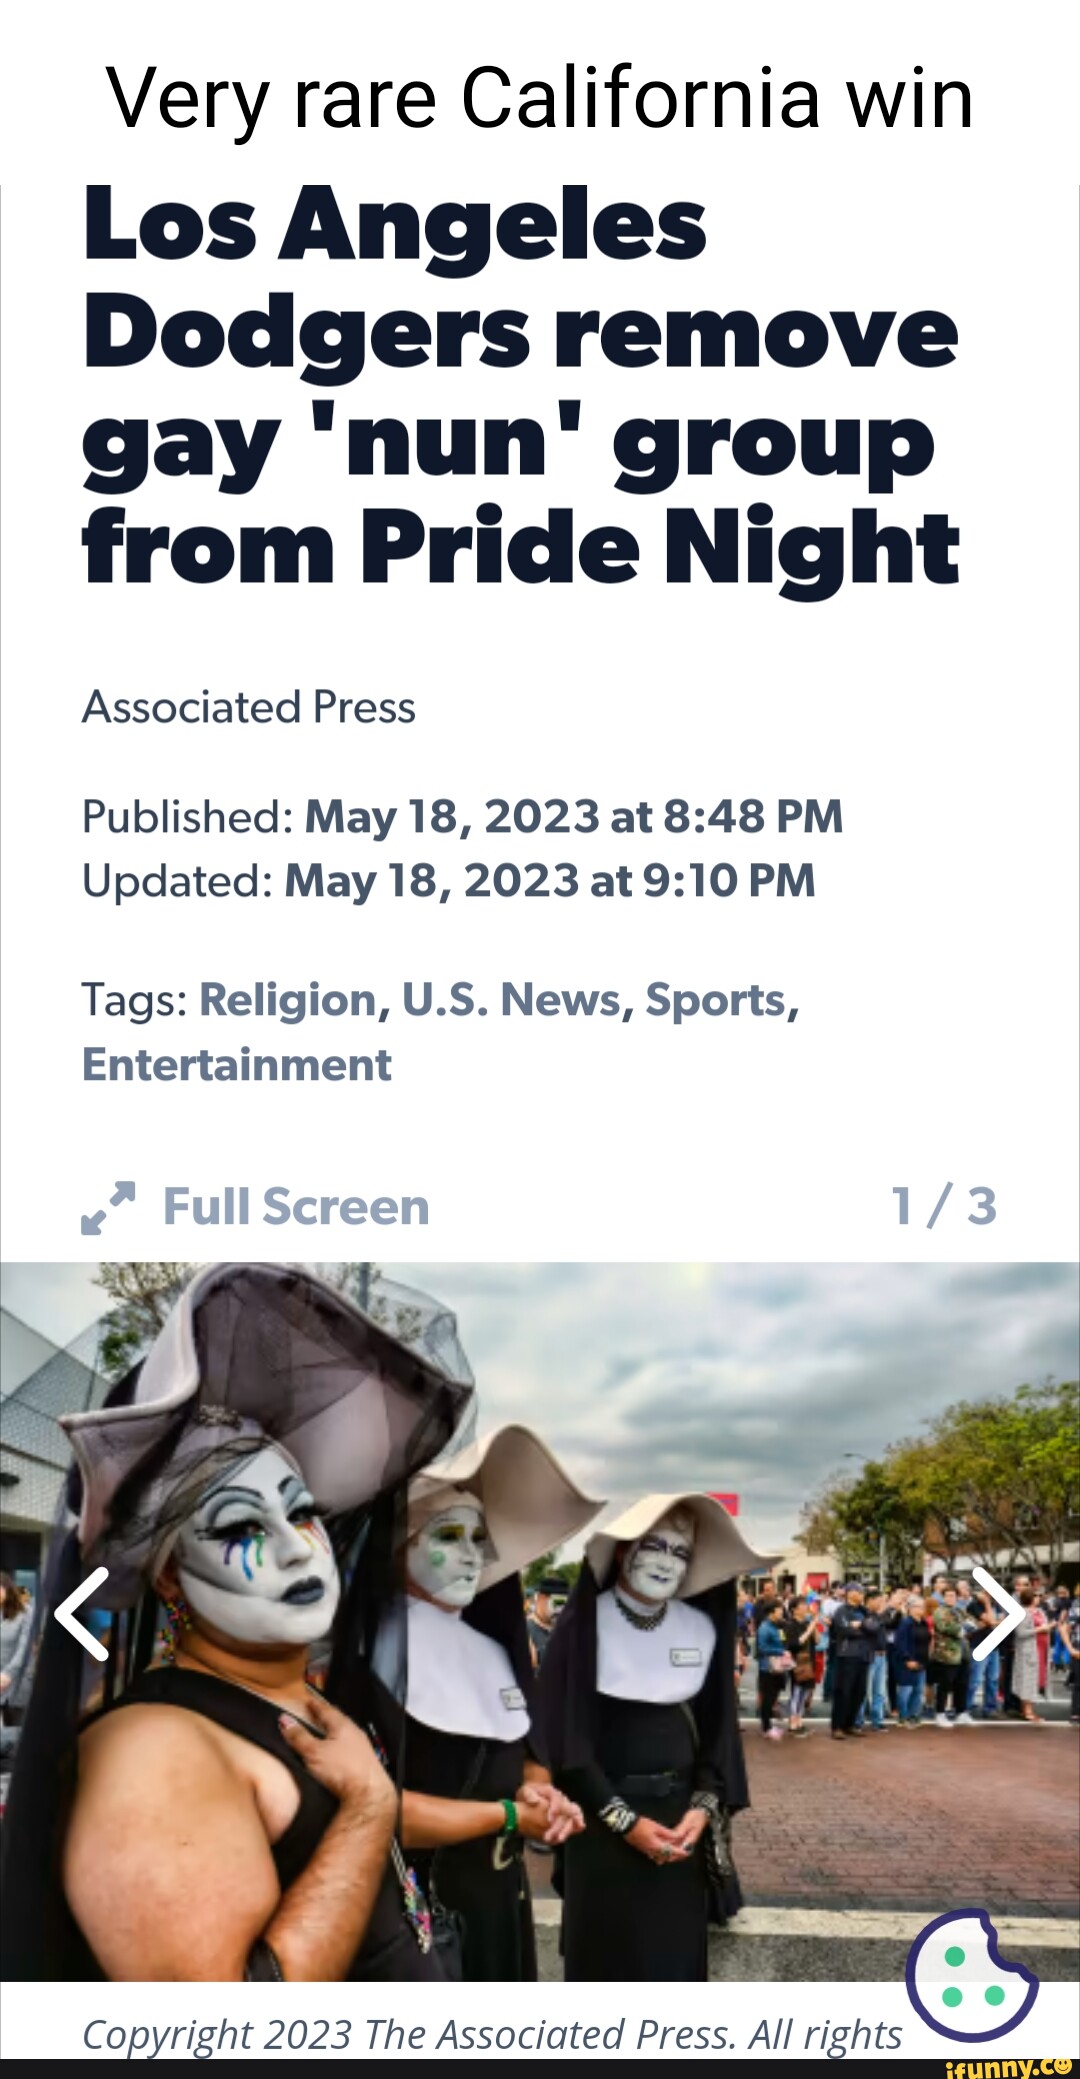 Los Angeles Dodgers remove gay 'nun' group from Pride Night